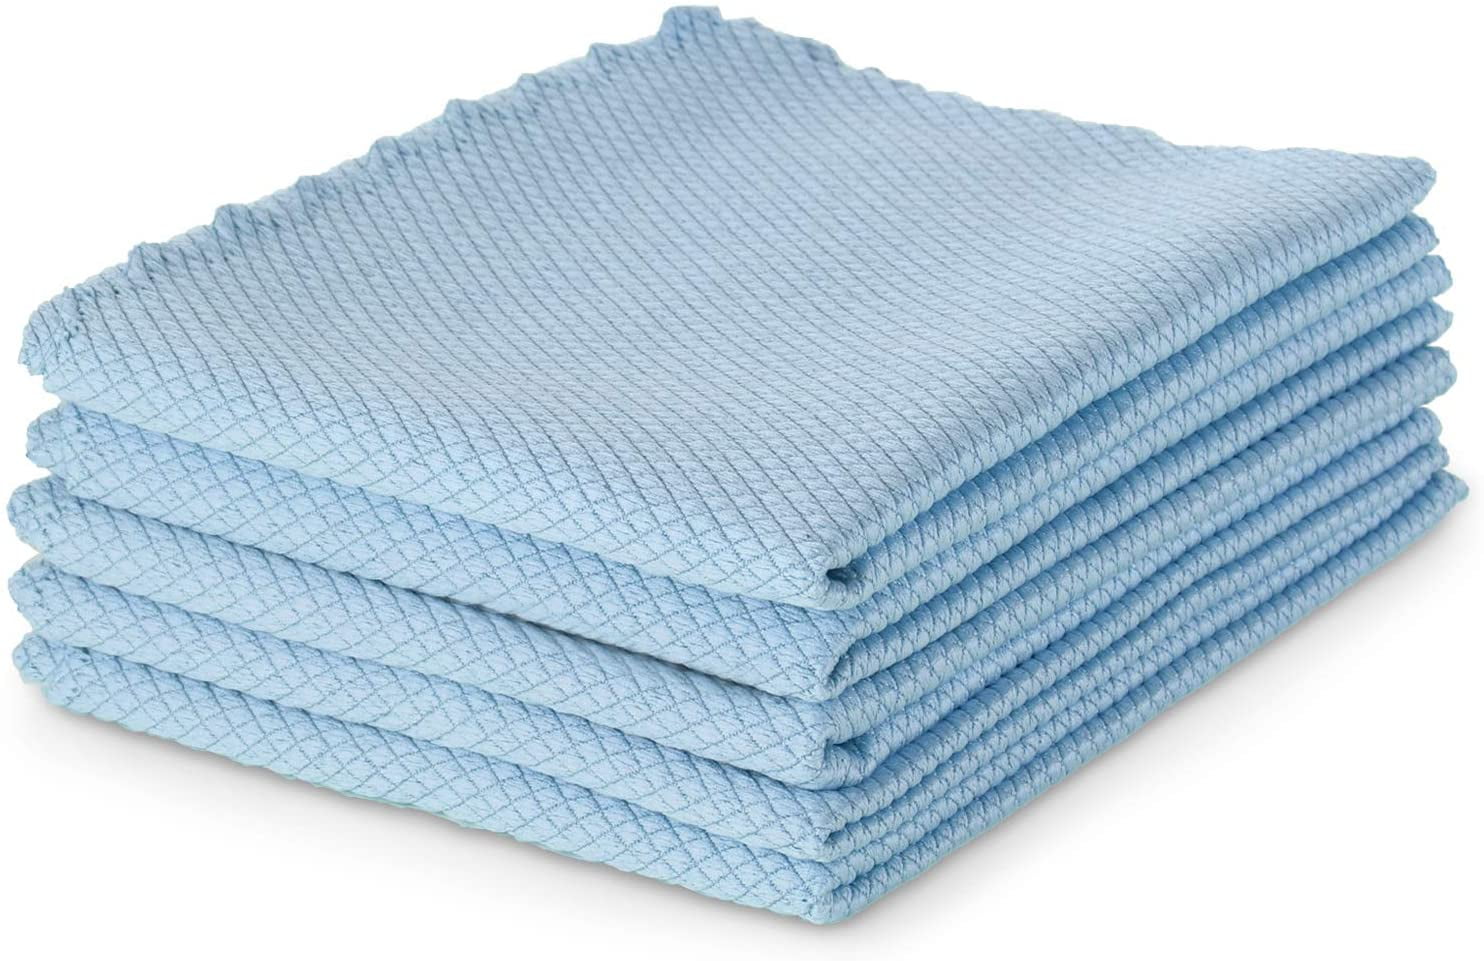 Details about   Microfiber Glass Cleaning Cloths 8 Pack Lint Free Streak Free Quick Easily Clean 